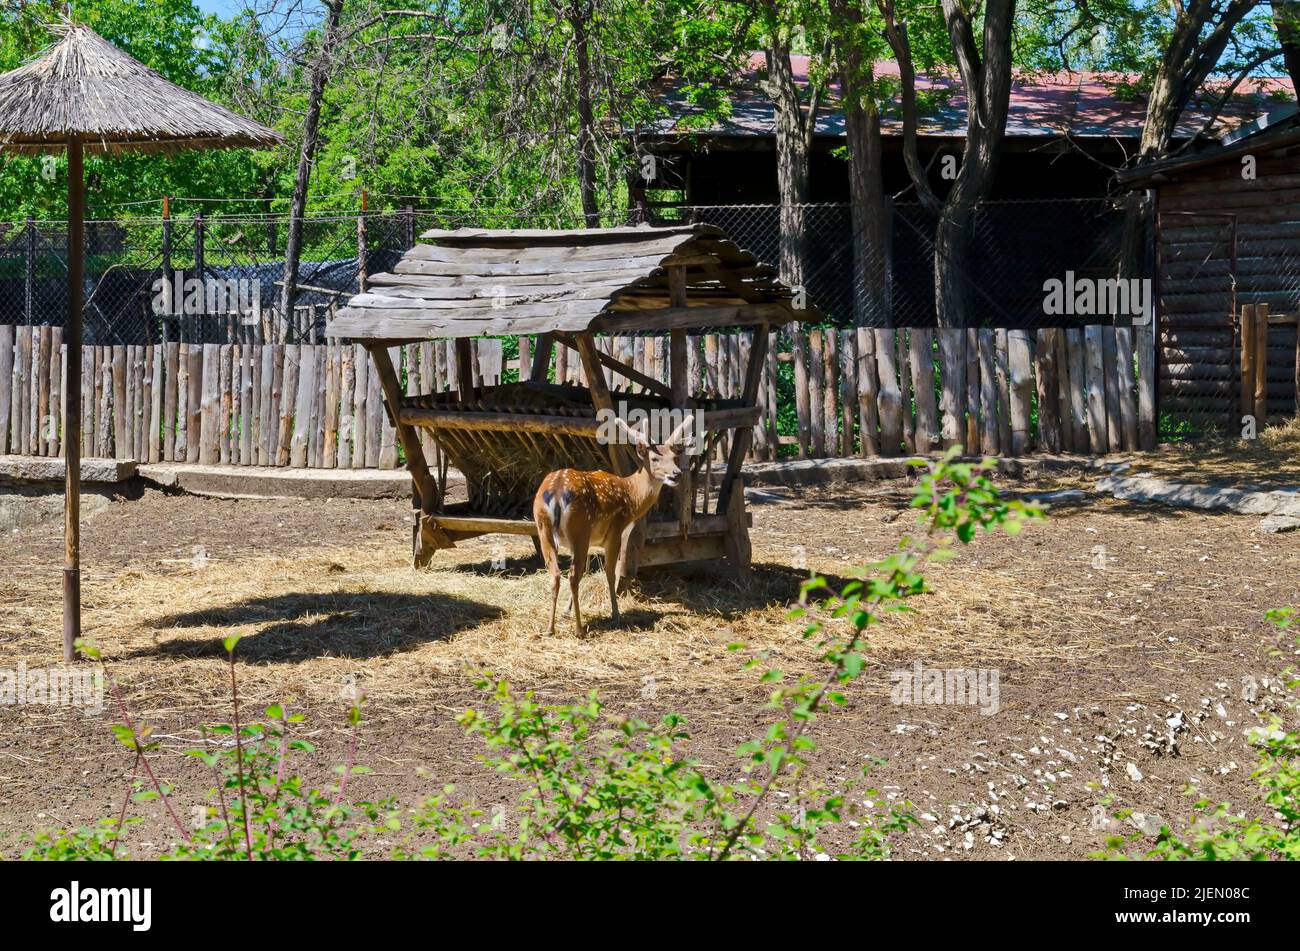 View of part of a yard with animals Dama dama  outdoors, Sofia, Bulgaria Stock Photo